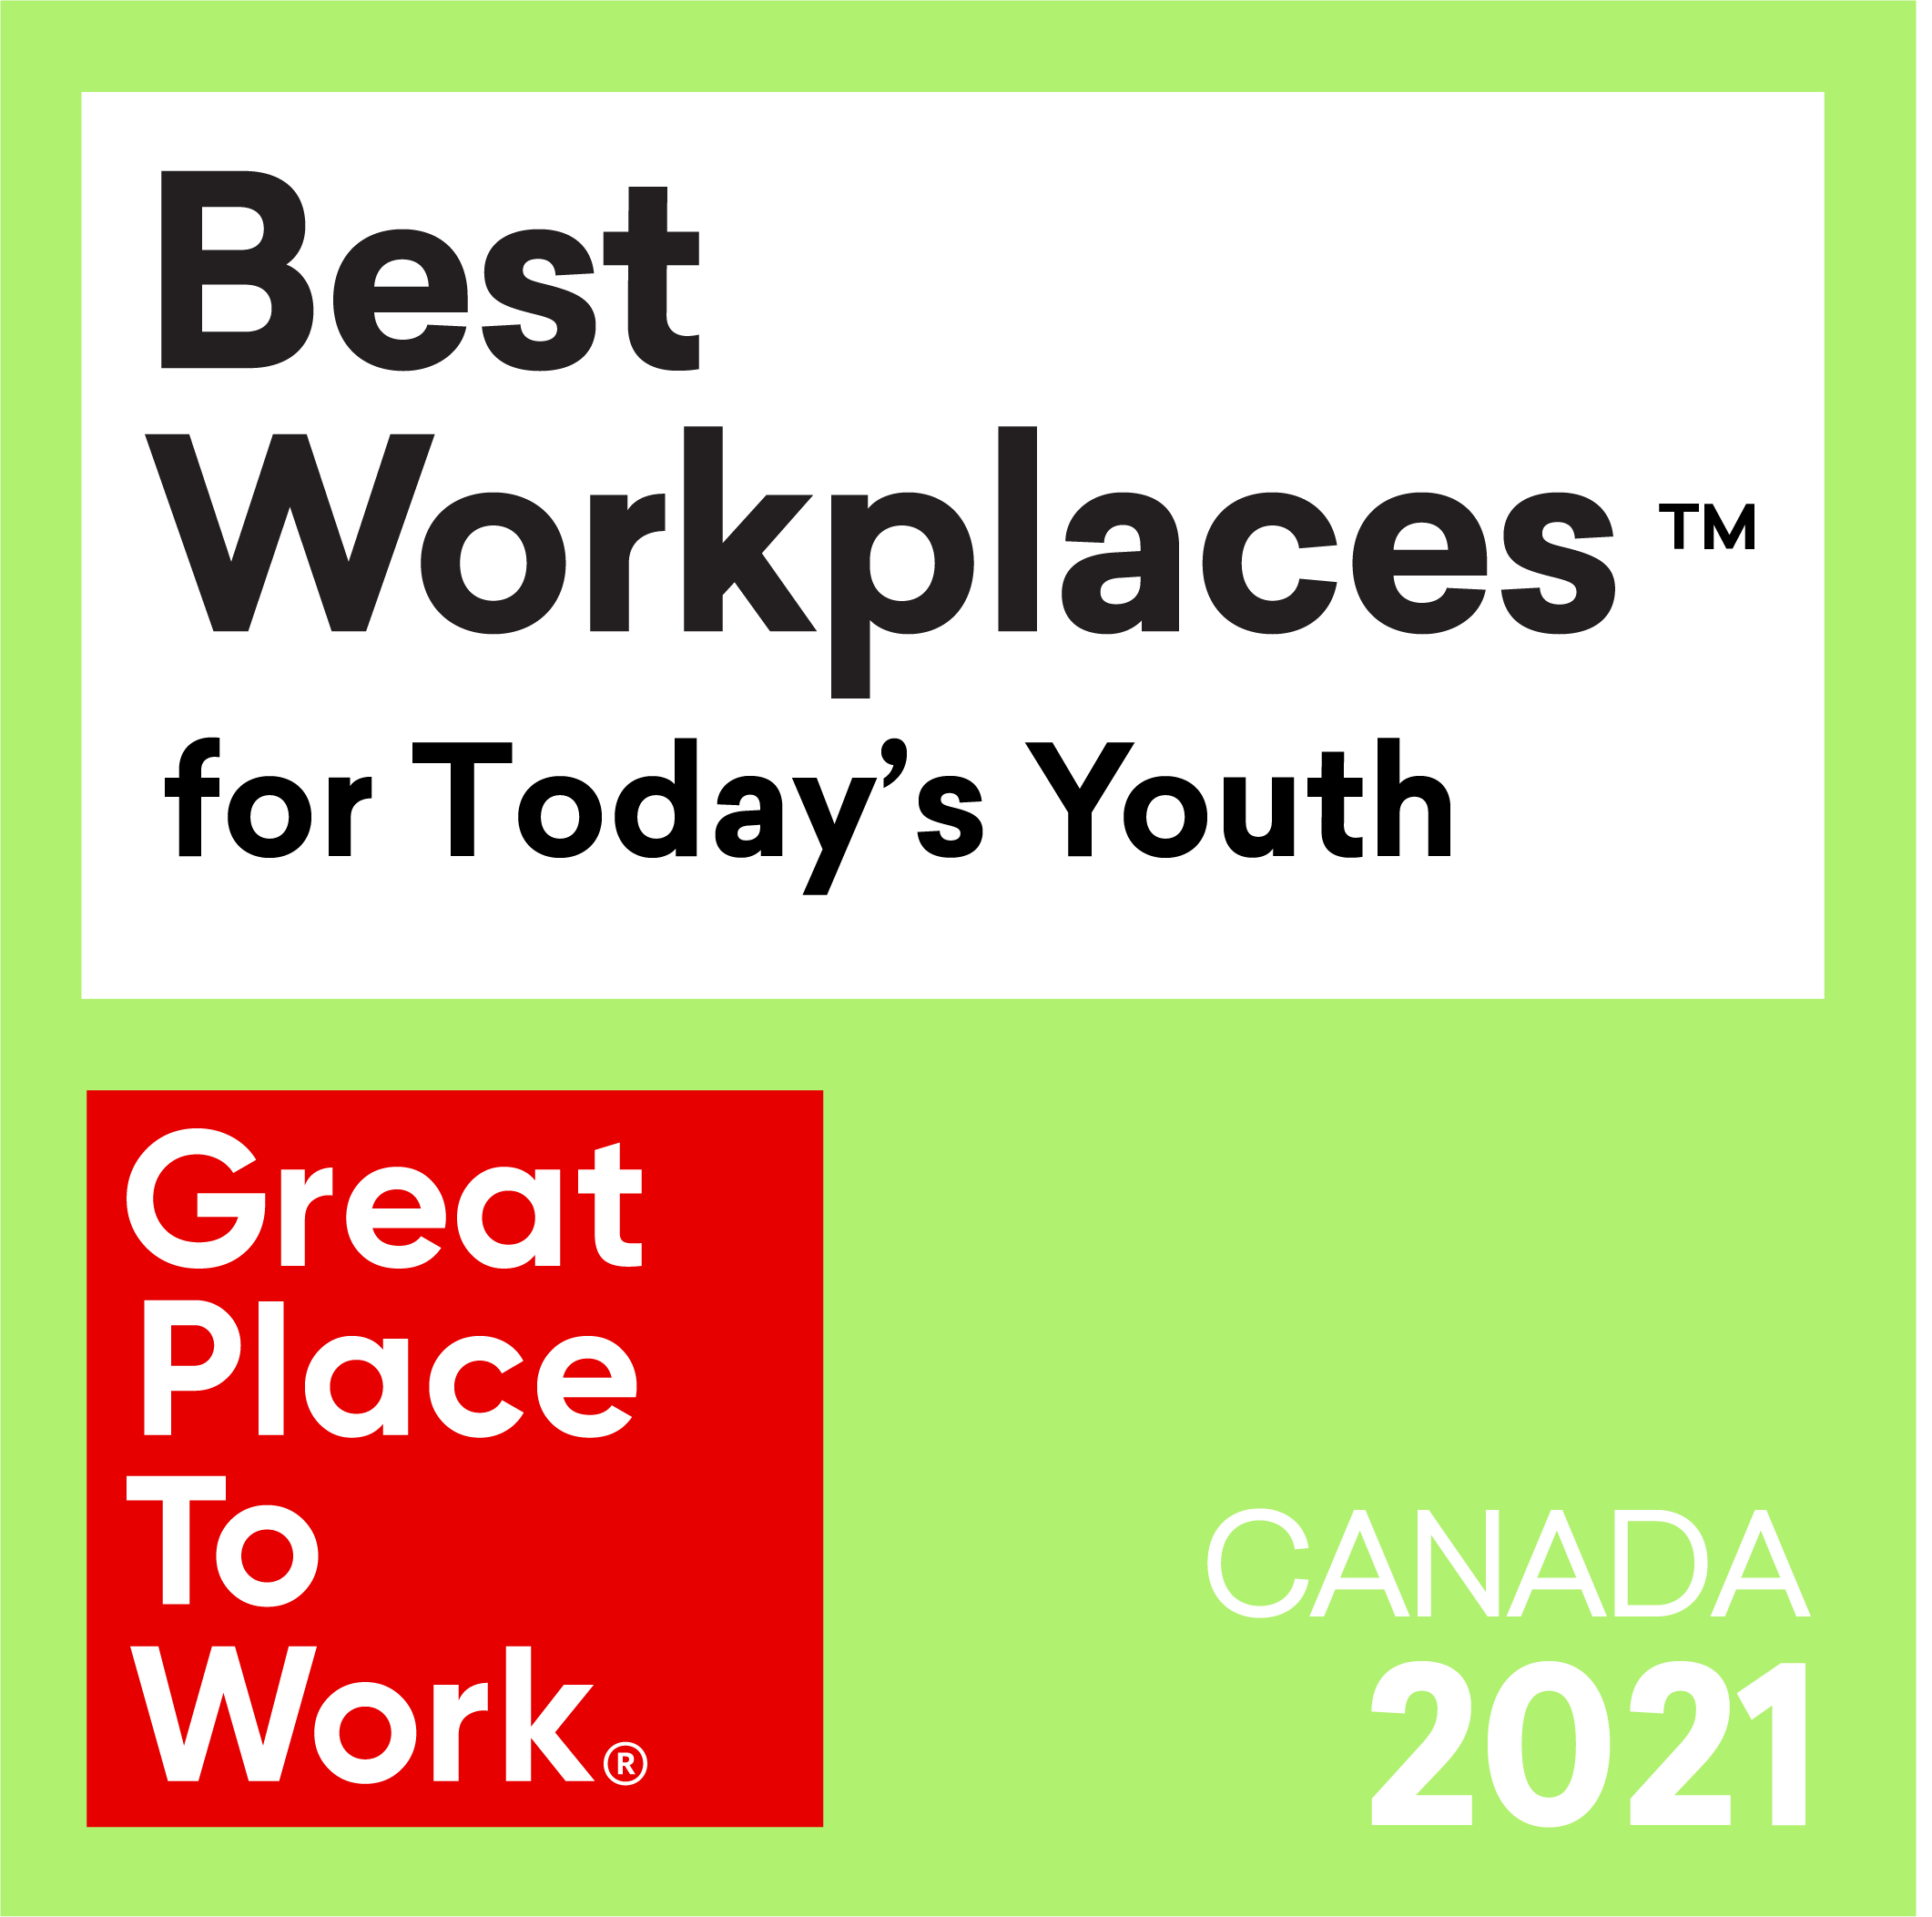 Great Place To Work Canada 2021 Award Banner - Best Workplaces for Today's Youth